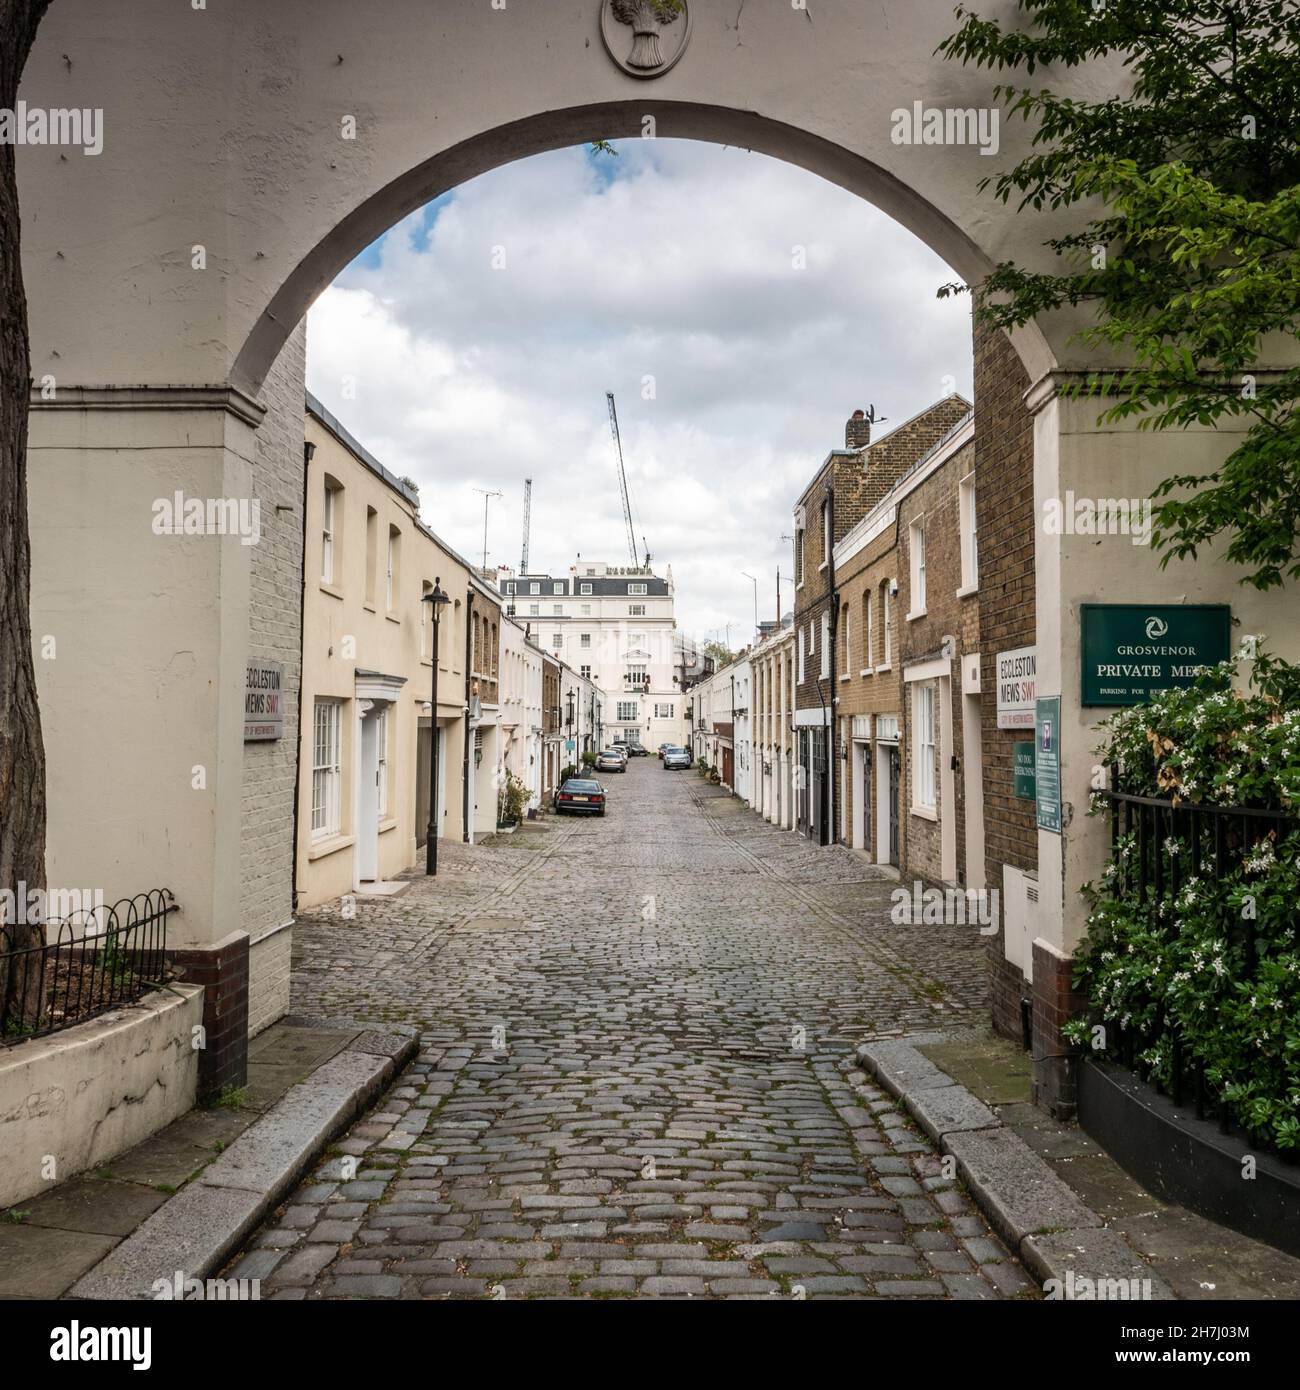 London Mews. Originally stables for affluent London homes, Mews cottages have become desirable residences in their own right. Stock Photo